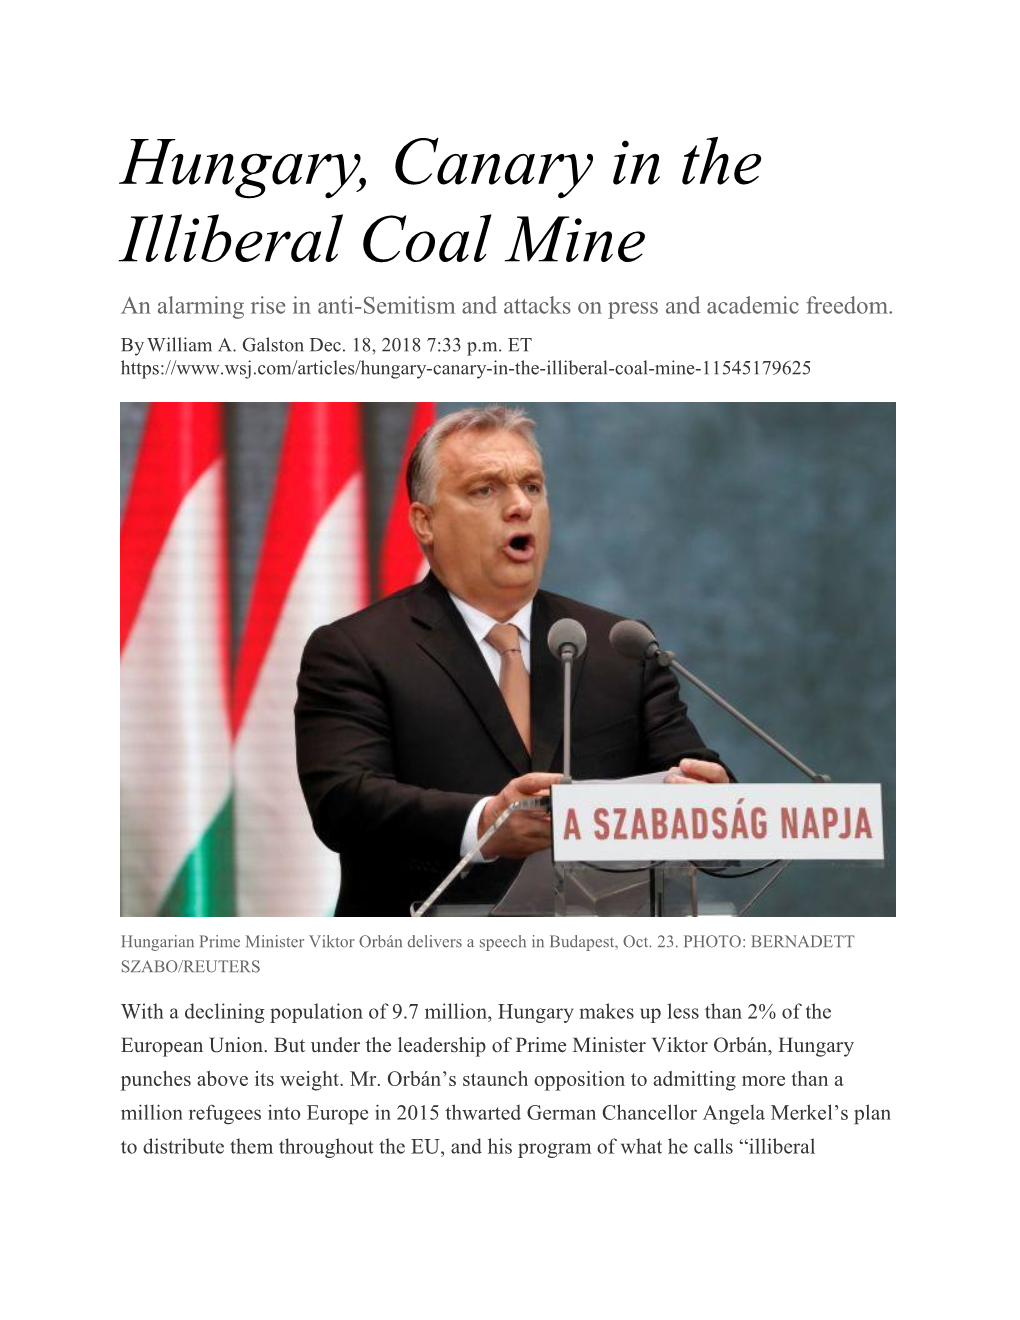 Hungary, Canary in the Illiberal Coal Mine an Alarming Rise in Anti-Semitism and Attacks on Press and Academic Freedom